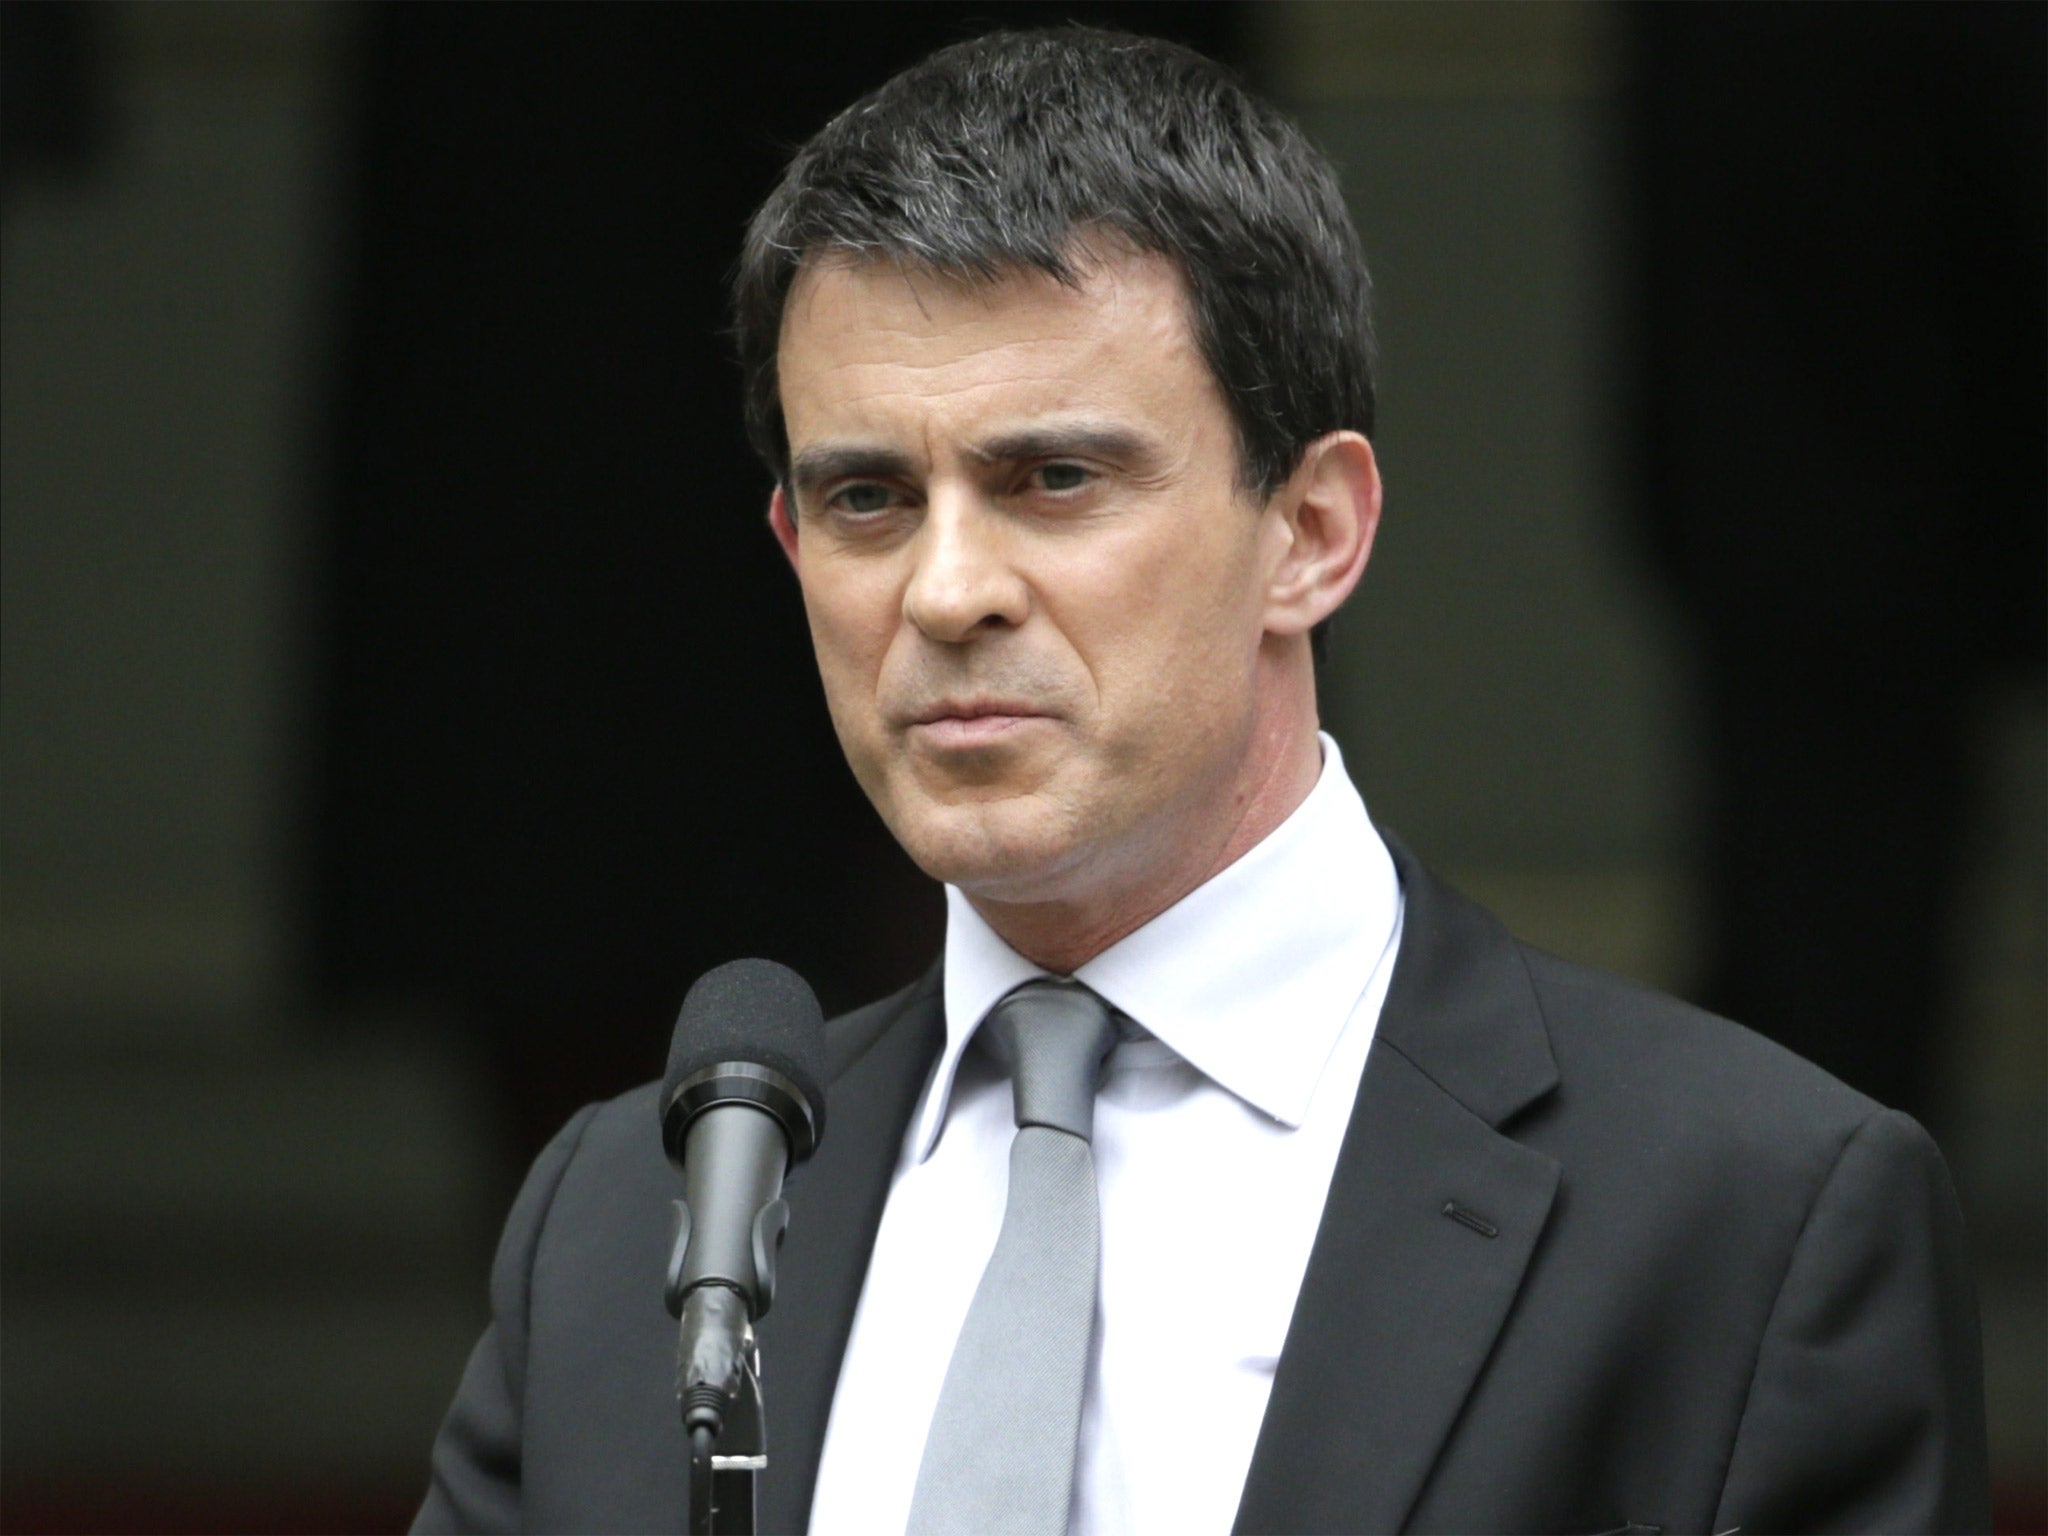 The charismatic Manuel Valls has been accused of being too far to the right on economic policy